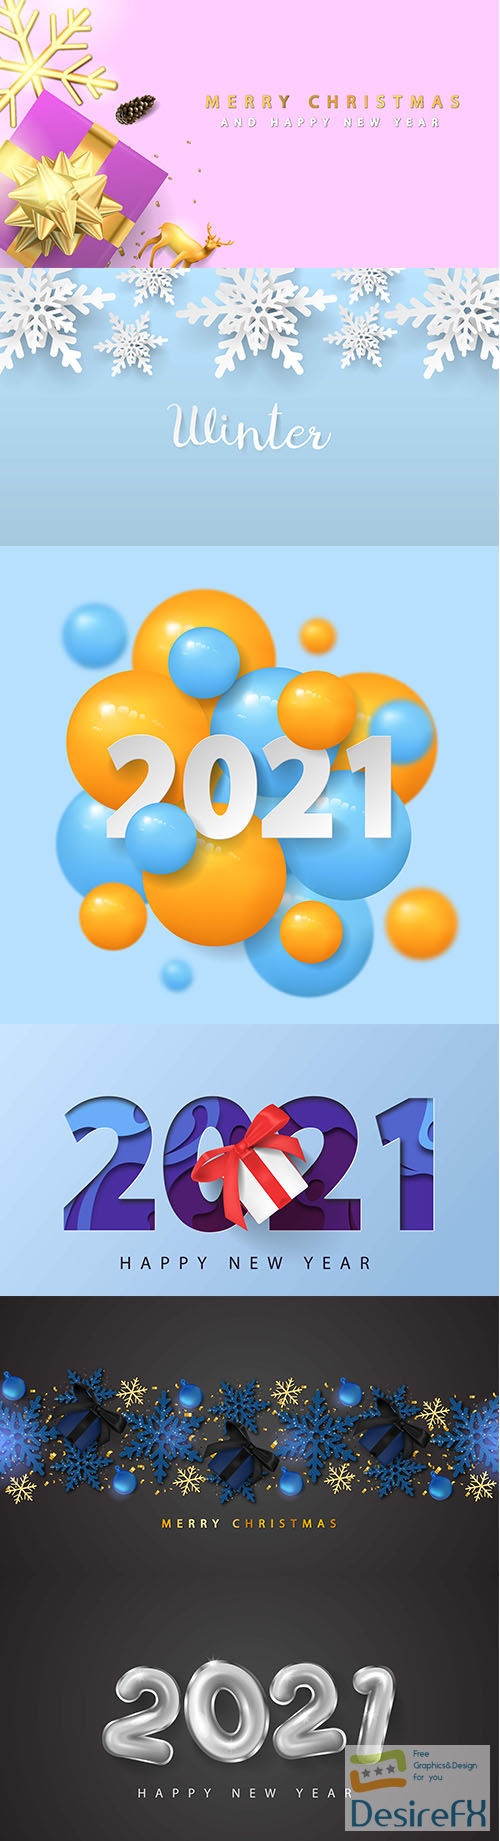 2021 happy new year with 3d papercut and giftbox background